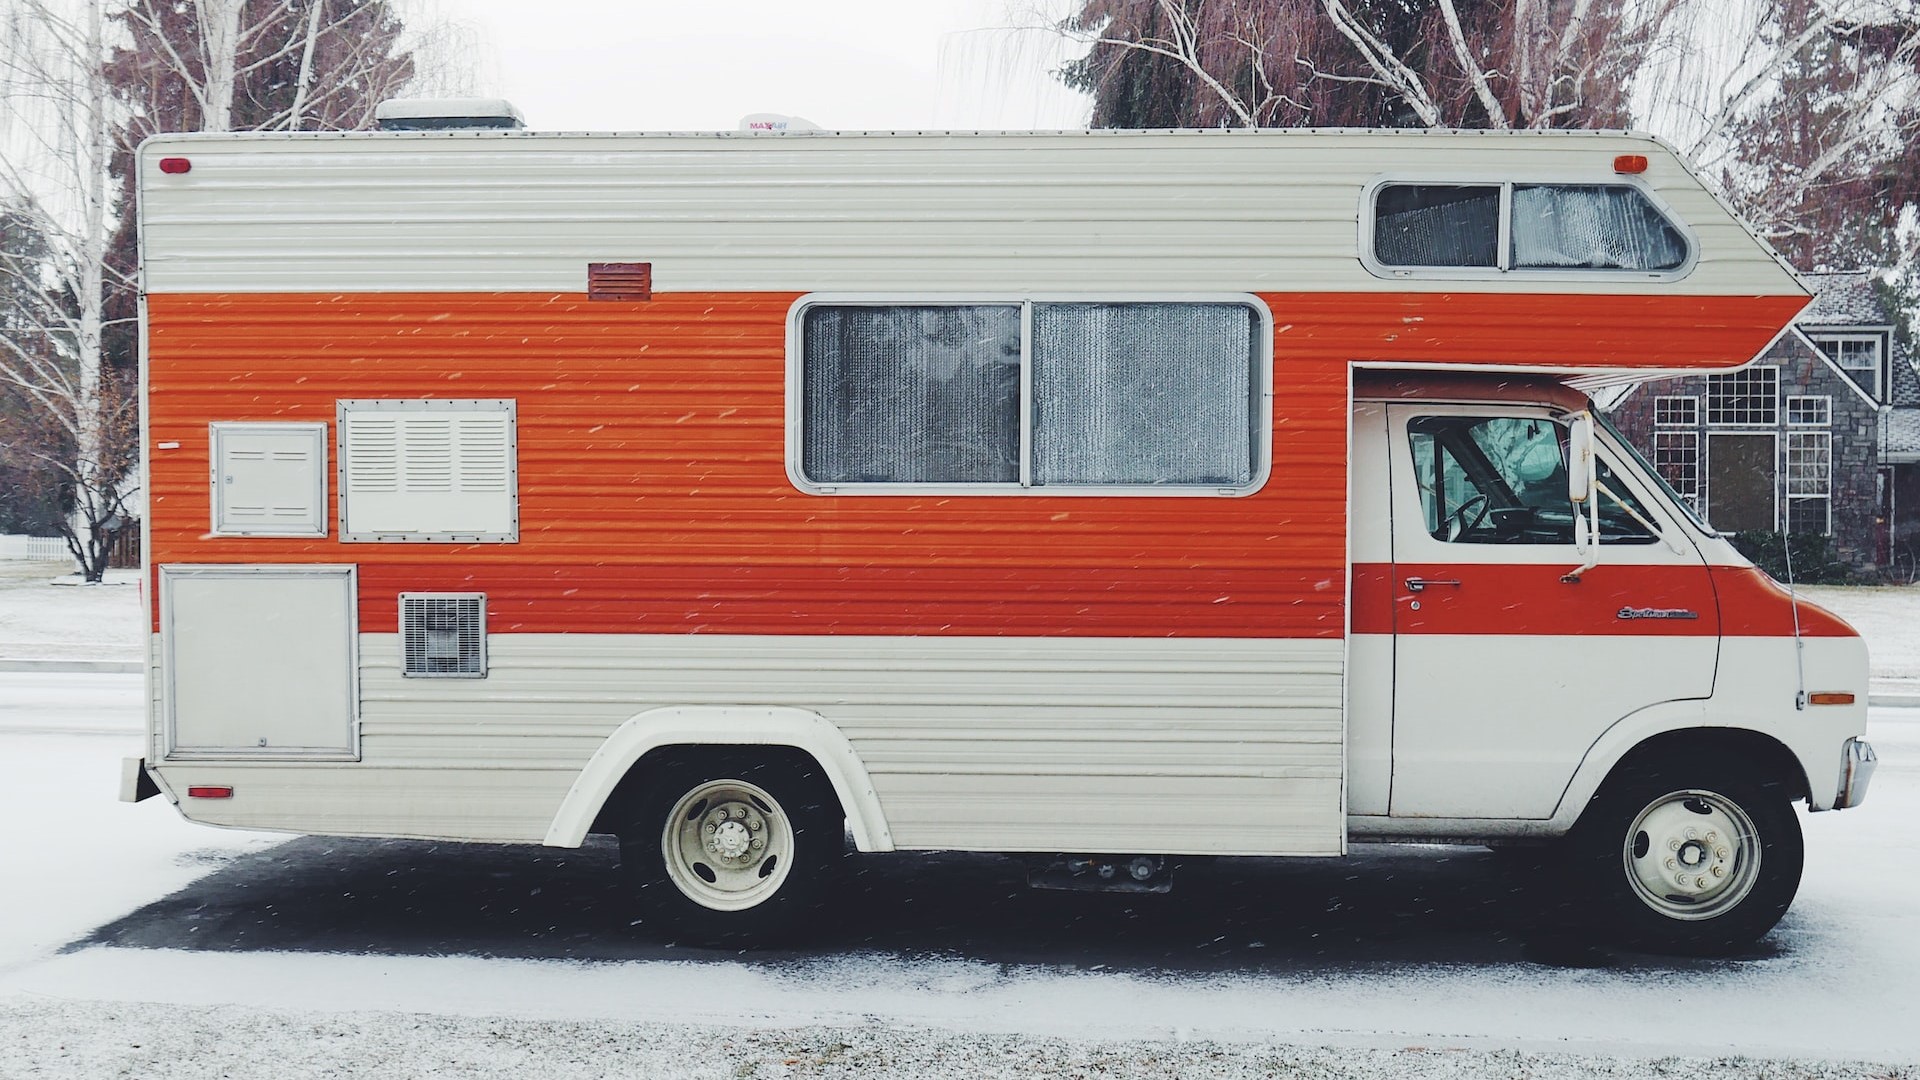 Orange and White RV by Snow | Goodwill Car Donations